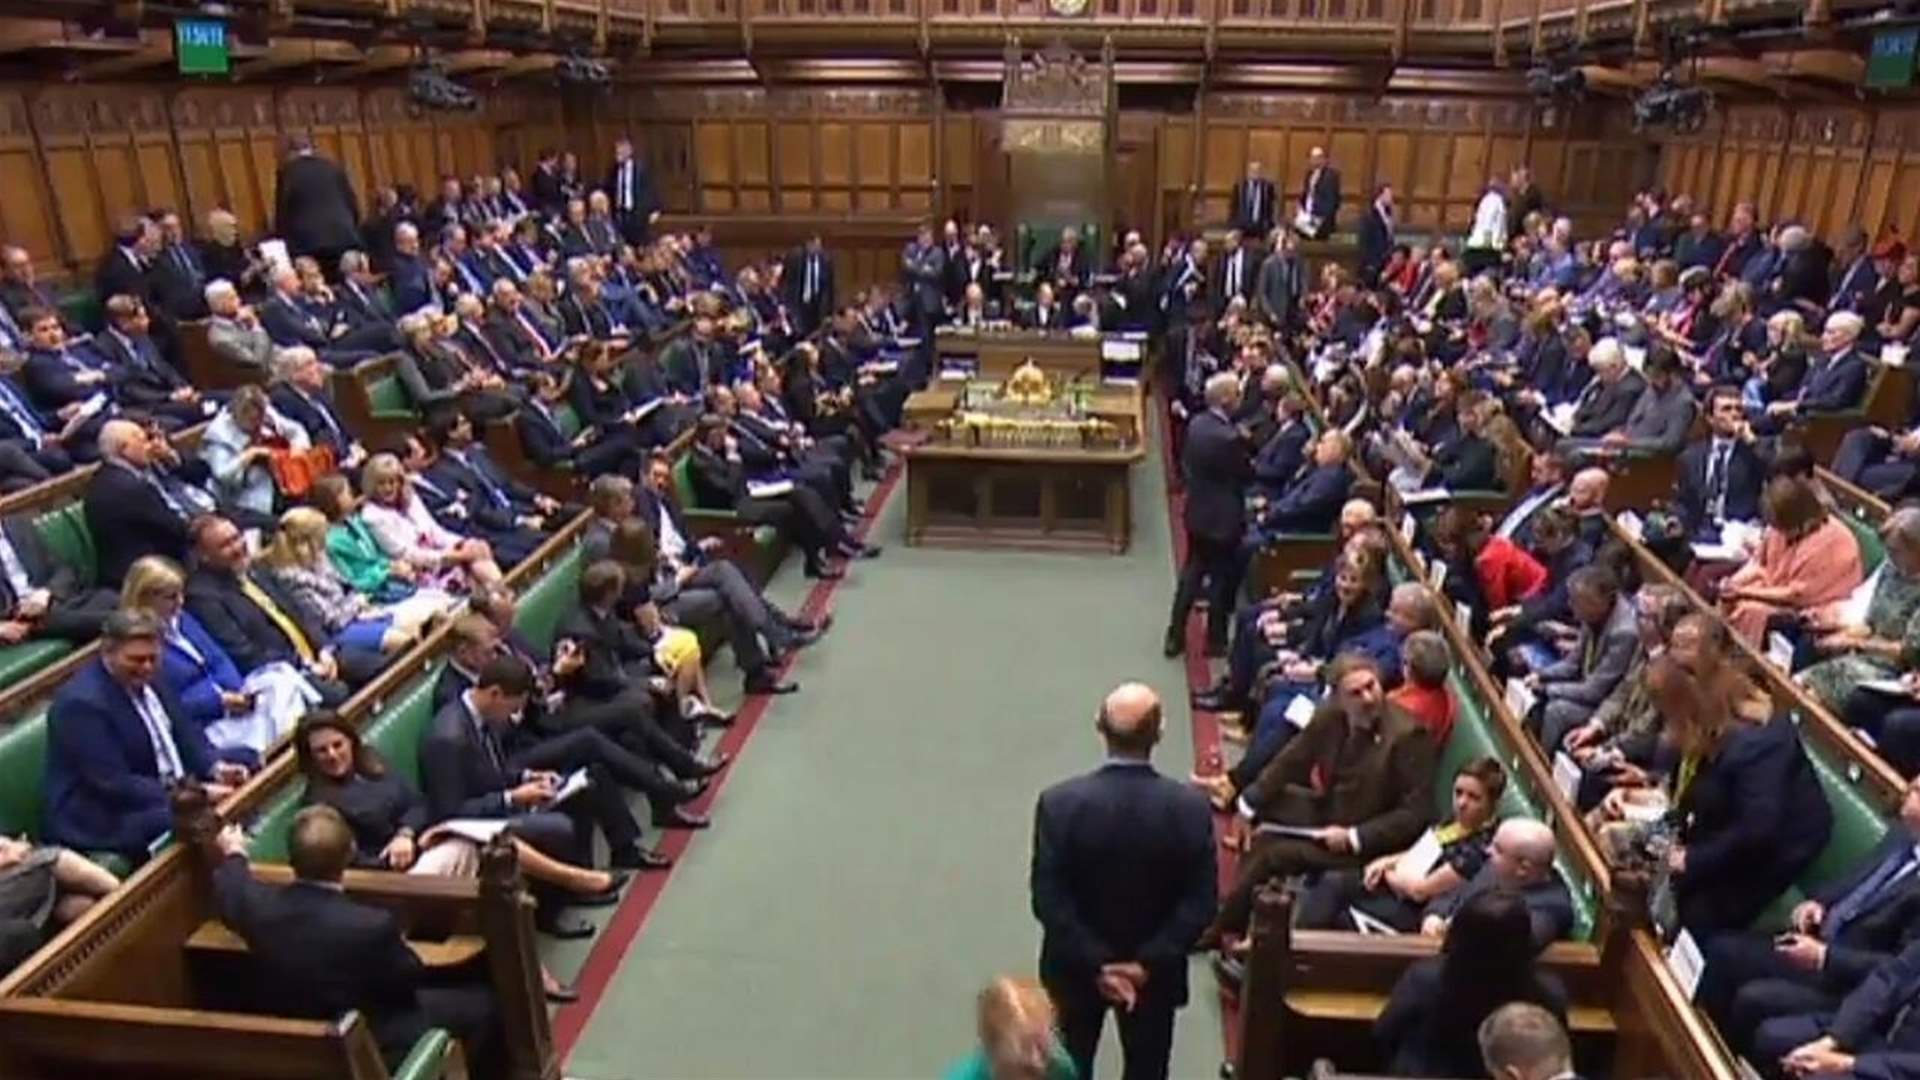 UK government vows to axe nearly 100 hereditary lawmakers from parliament